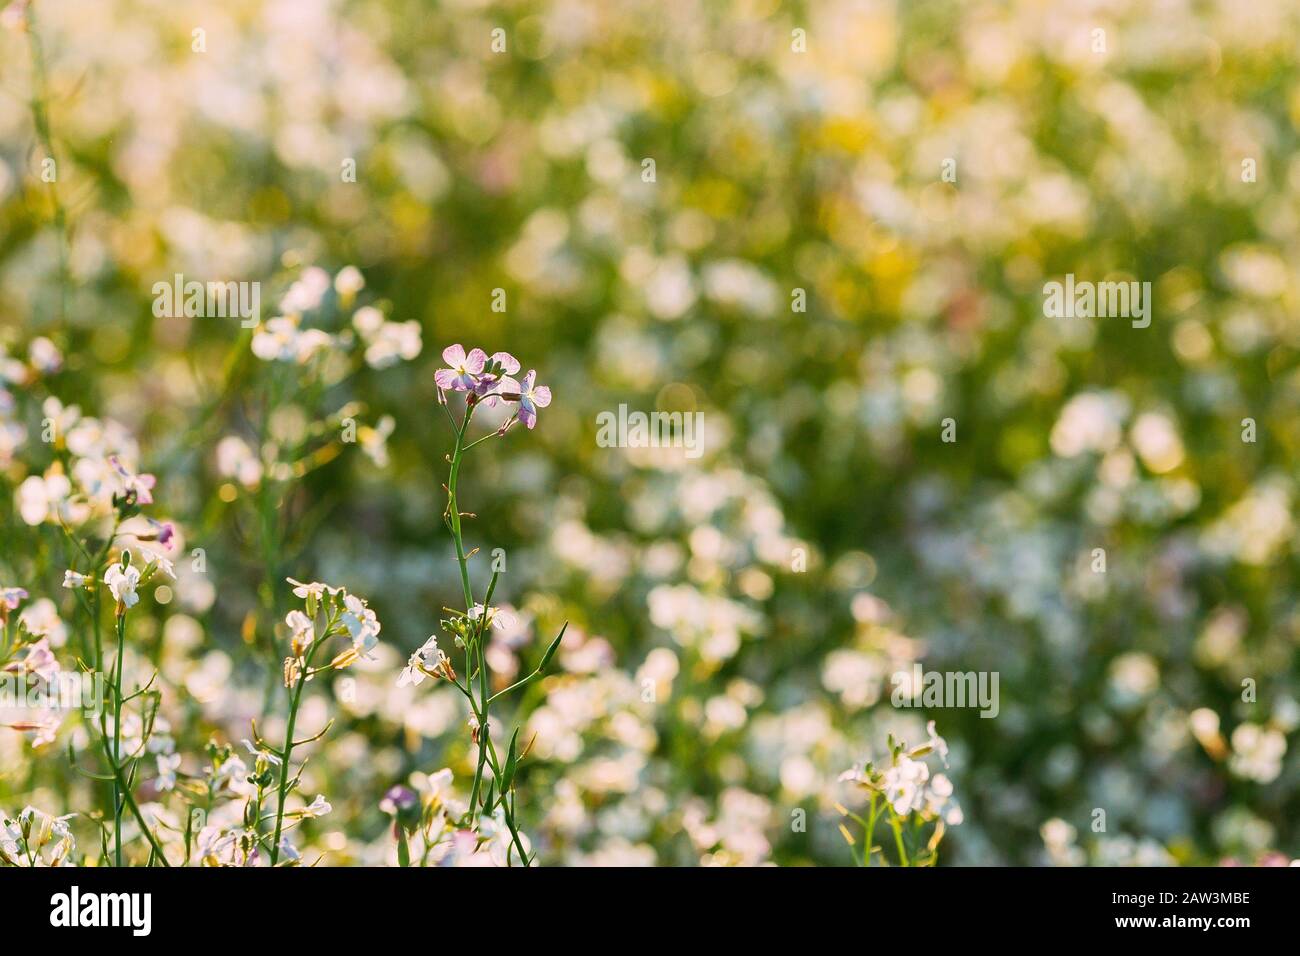 Flowering Wild Radish Or Jointed Charlock Or Cultivated Radish. Early Summer. Agricultural Background. Raphanus Sativus Stock Photo